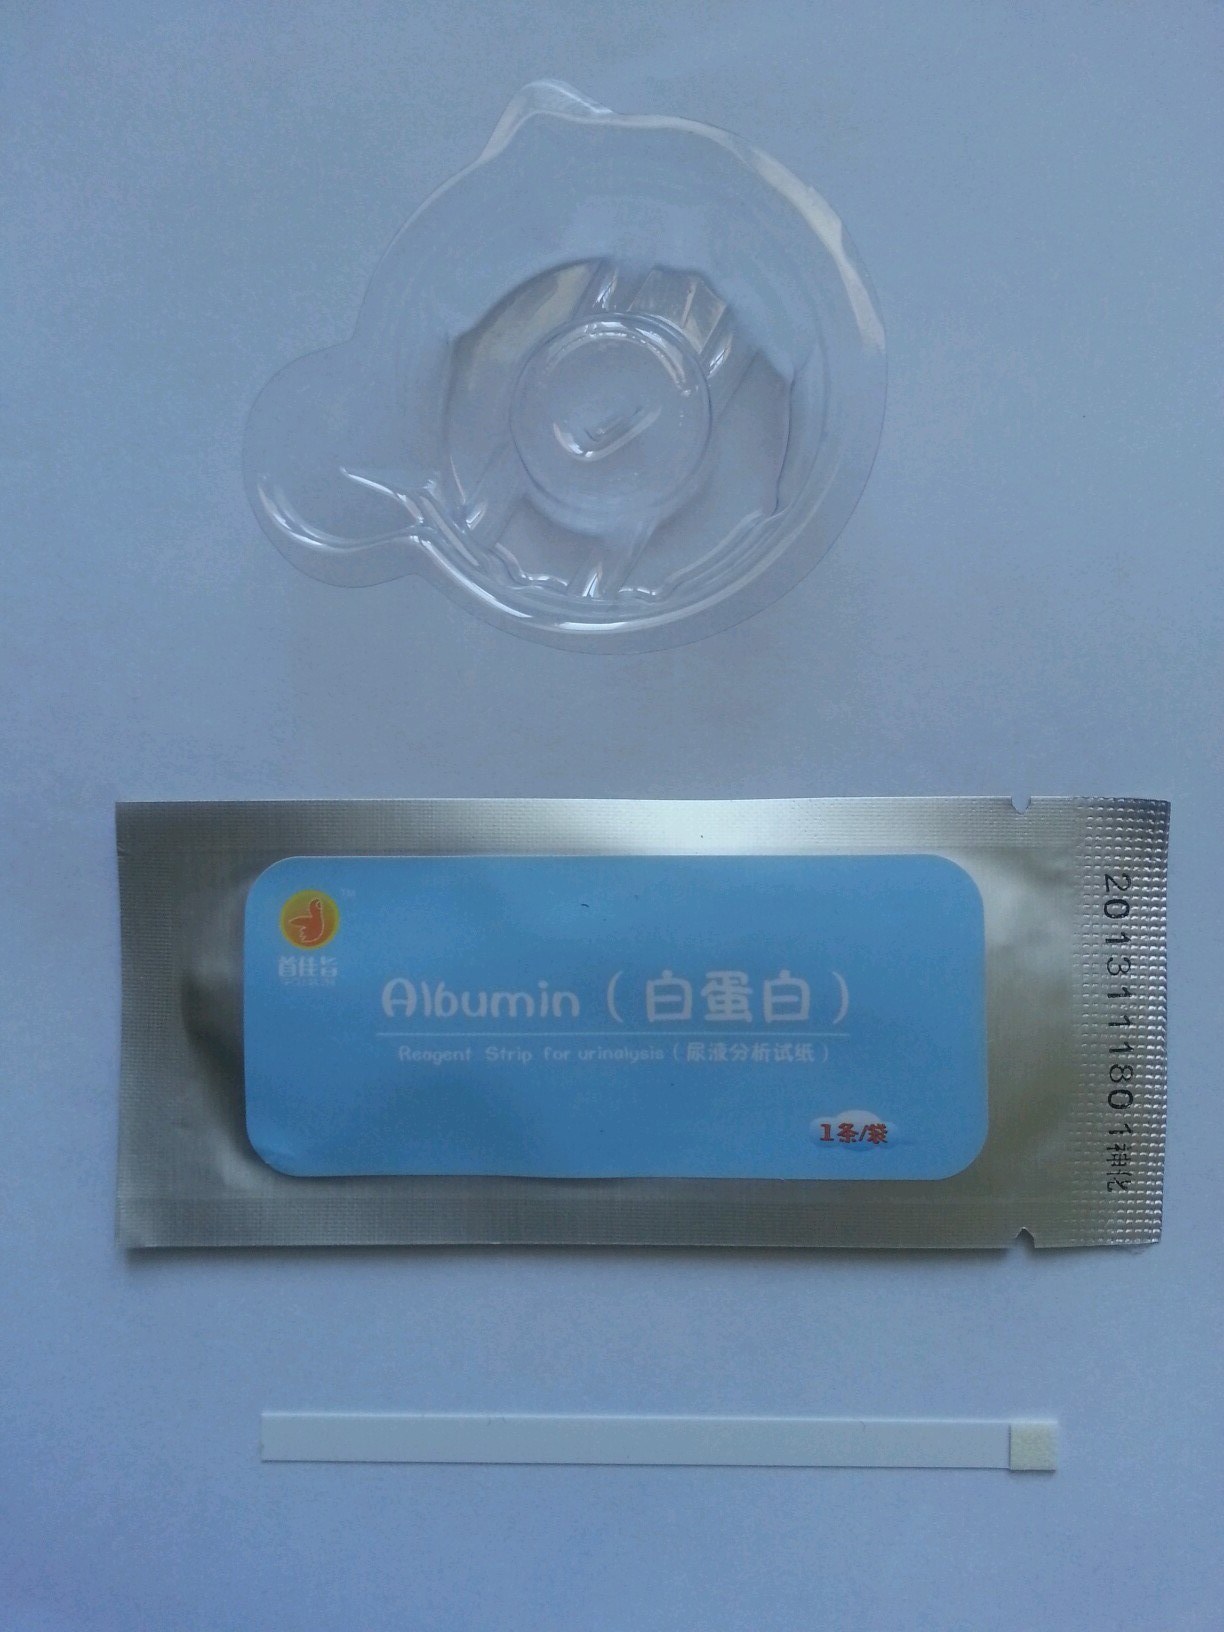 Reagent Strips for Urinalysis Albumin